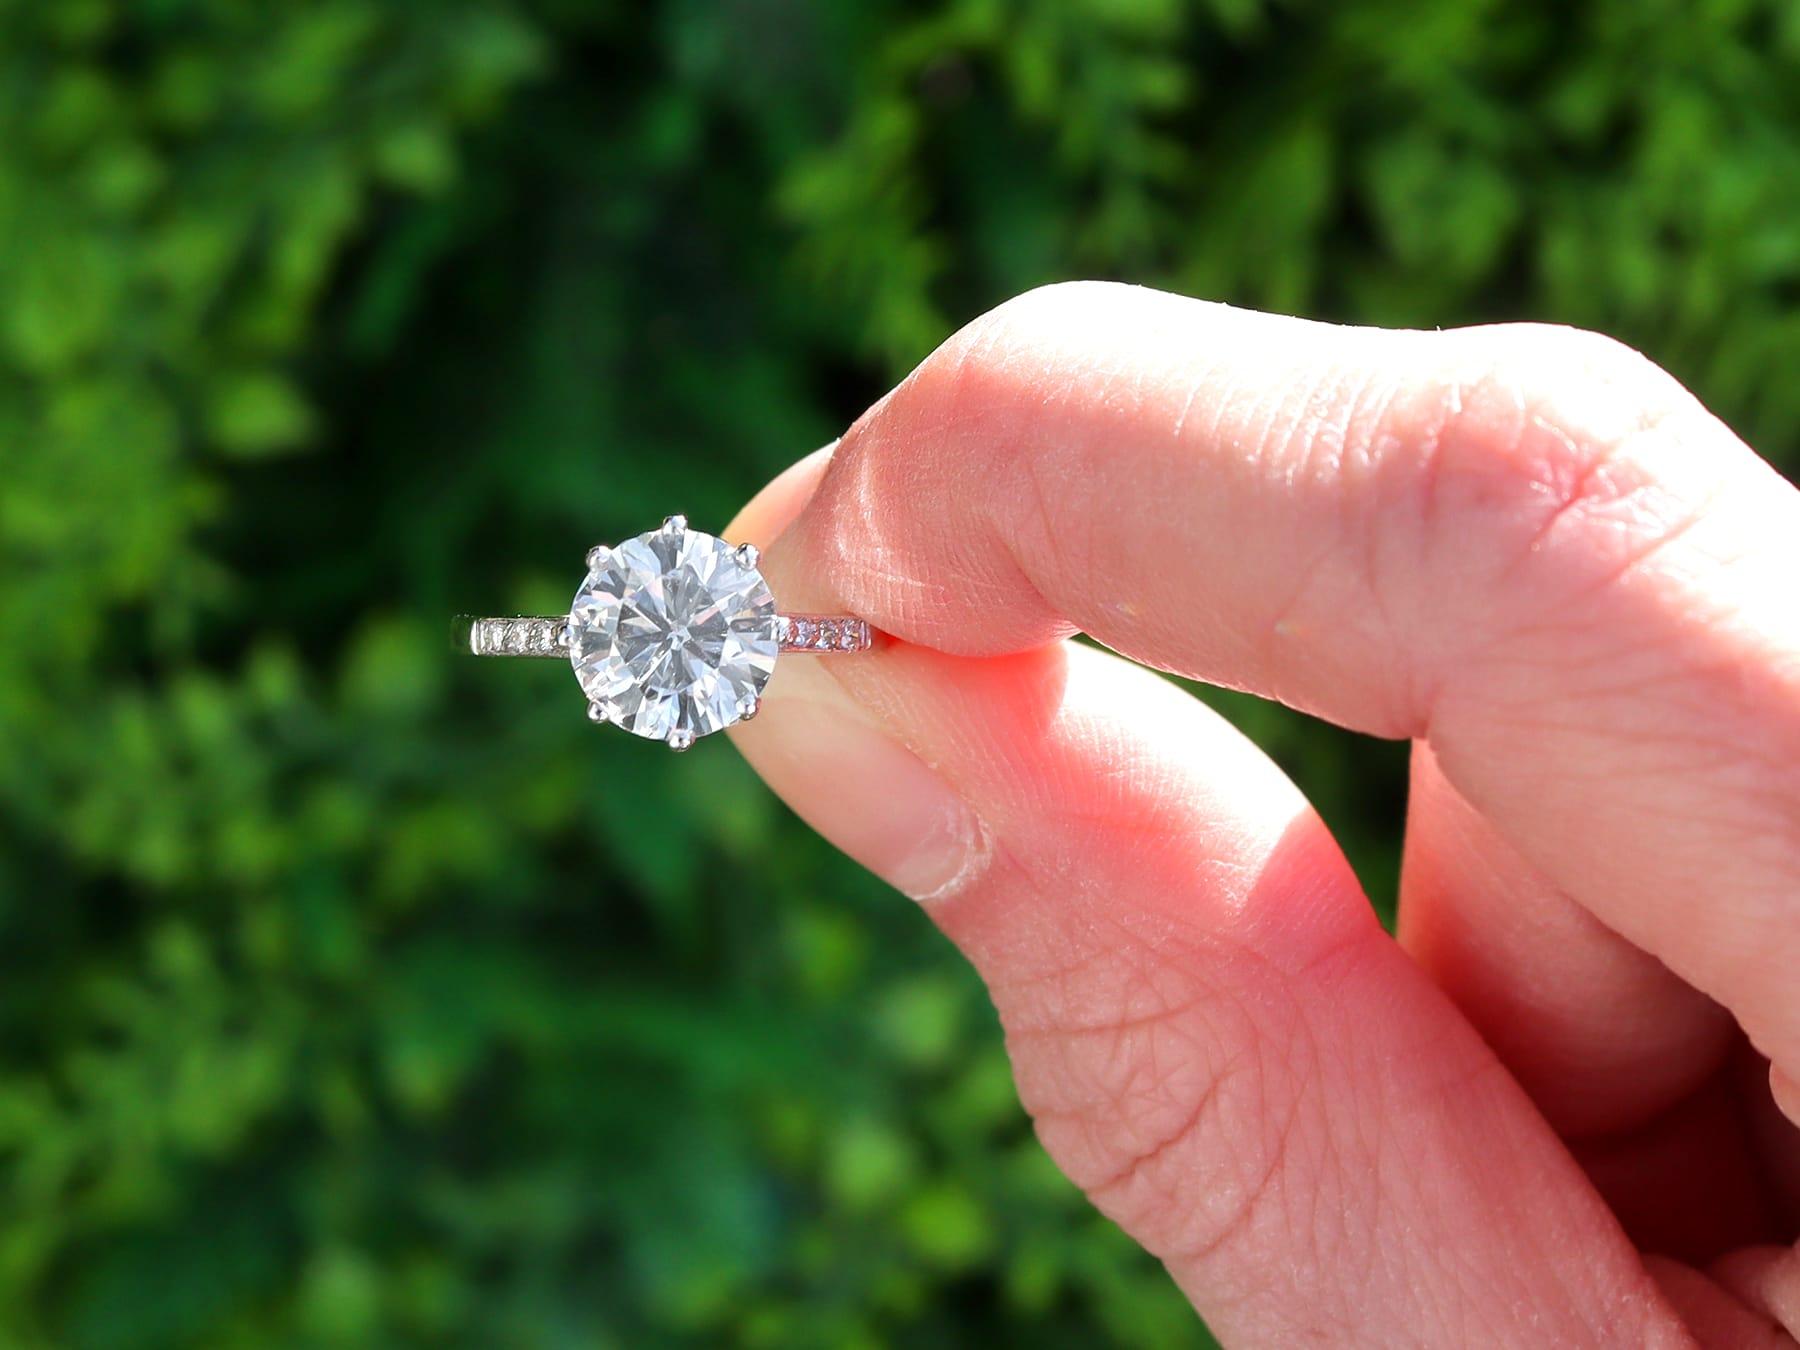 A stunning, fine and impressive antique 2.08 carat diamond and platinum solitaire engagement ring; part of our diverse jewelry and estate jewelry collections.

This stunning, fine and impressive diamond solitaire ring has been crafted in